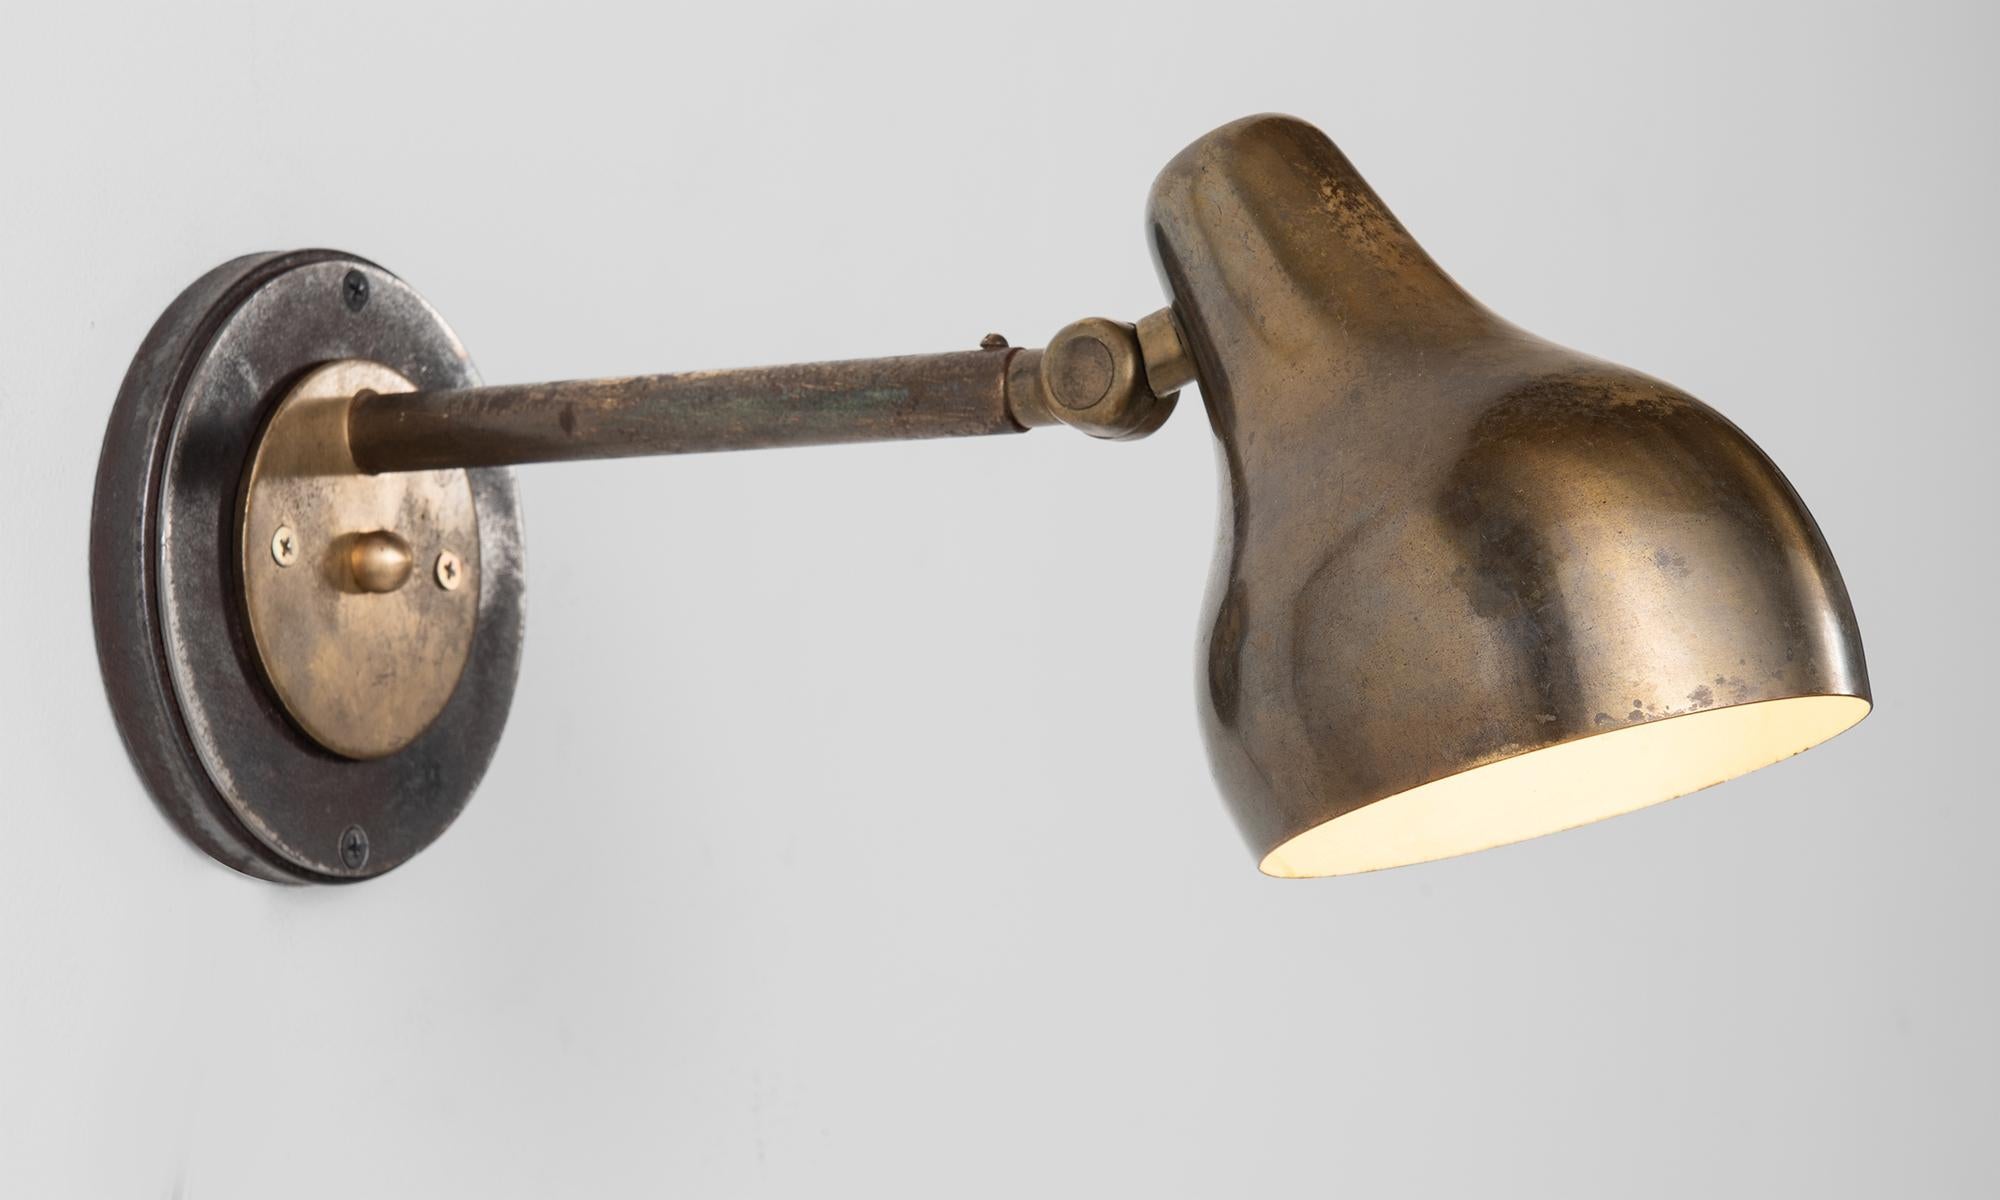 Pair of Vilhelm Laurtizen wall lights by Louis Poulsen, Denmark, circa 1942.

Adjustable brass sconce with oxidized steel backplate.